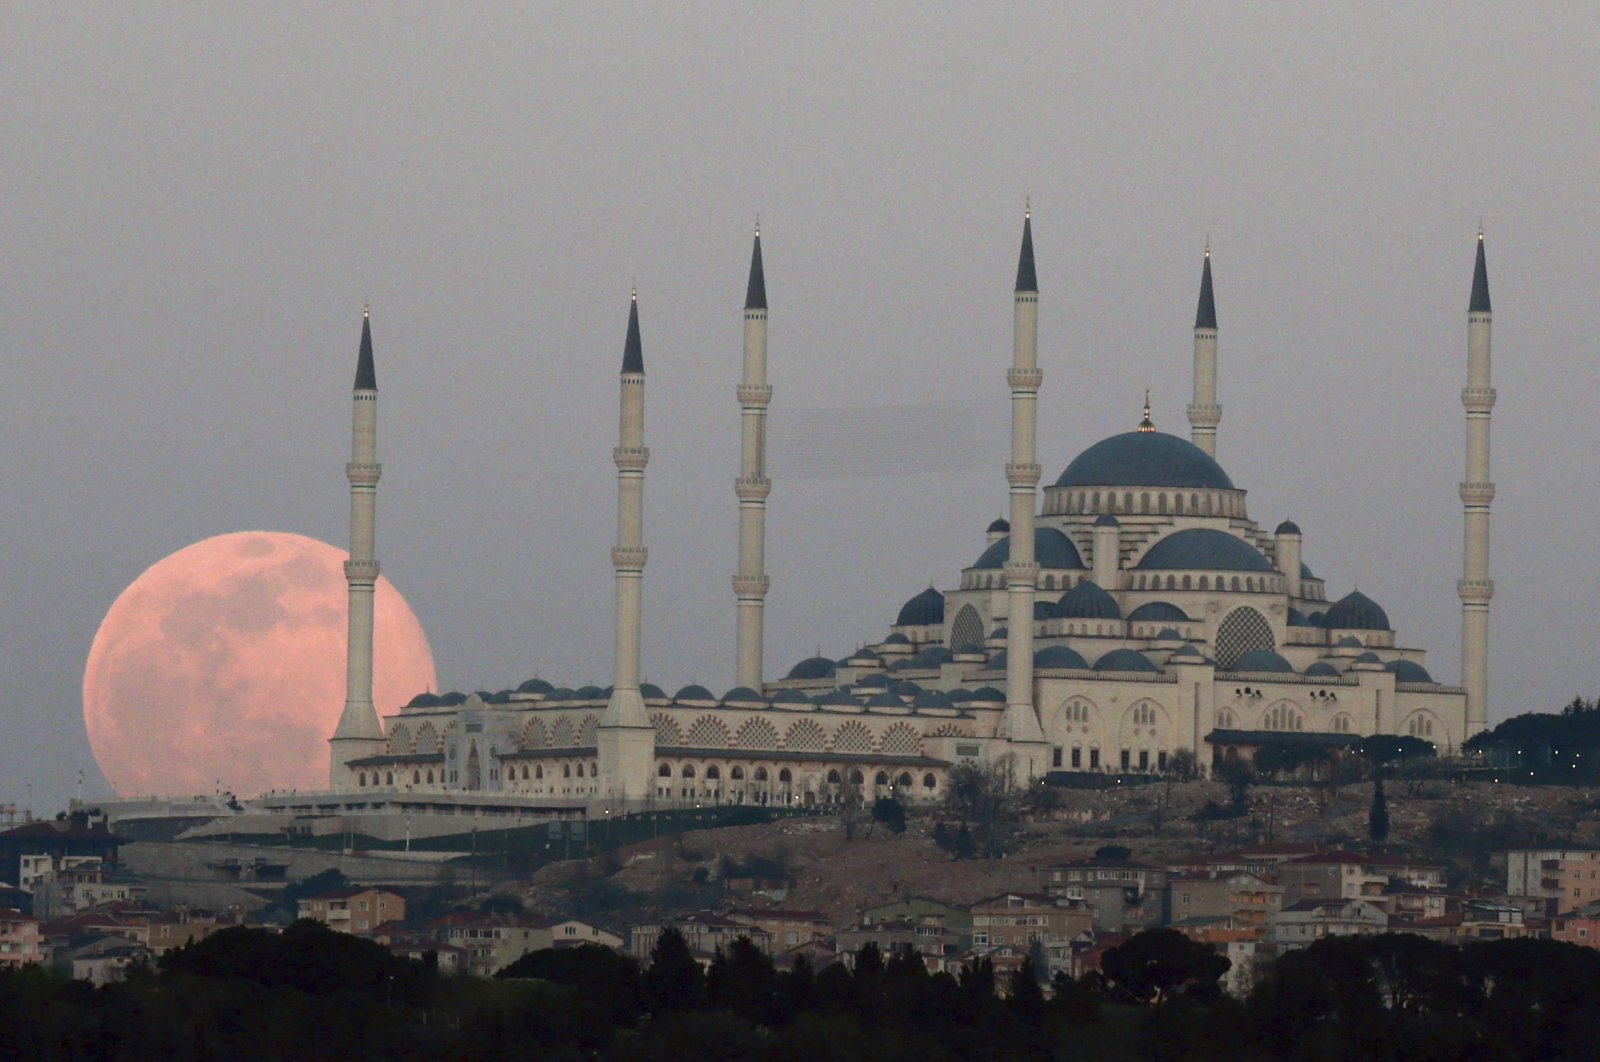 The full moon rises Sunday, March 28, 2021 over the sky in Istanbul, with the Çamlıca Grand Mosque, the largest mosque in Asia Minor. The March full moon is called the &quot;Worm Moon&quot;. (AP File Photo)